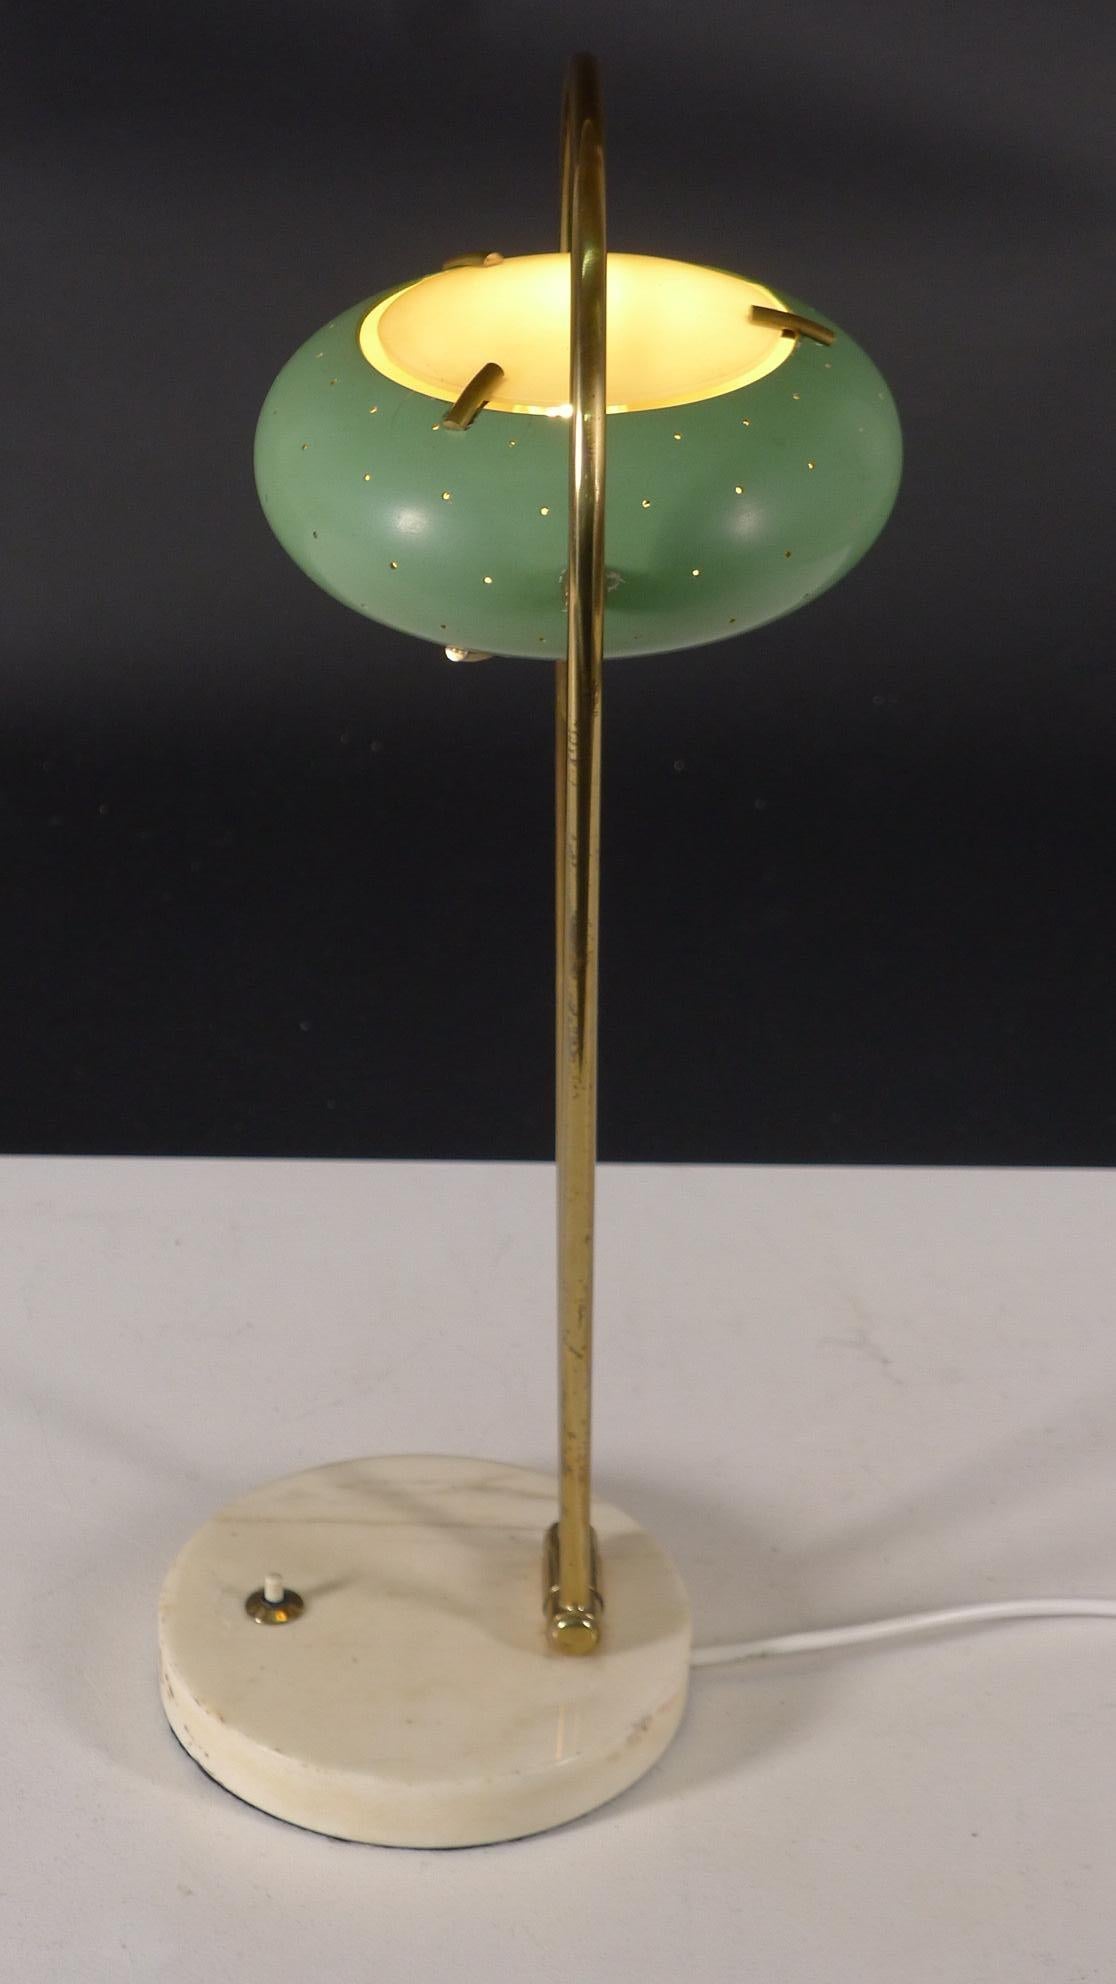 Italian Stilux Lamp, 1950s, fully adjustable with green perforated shade